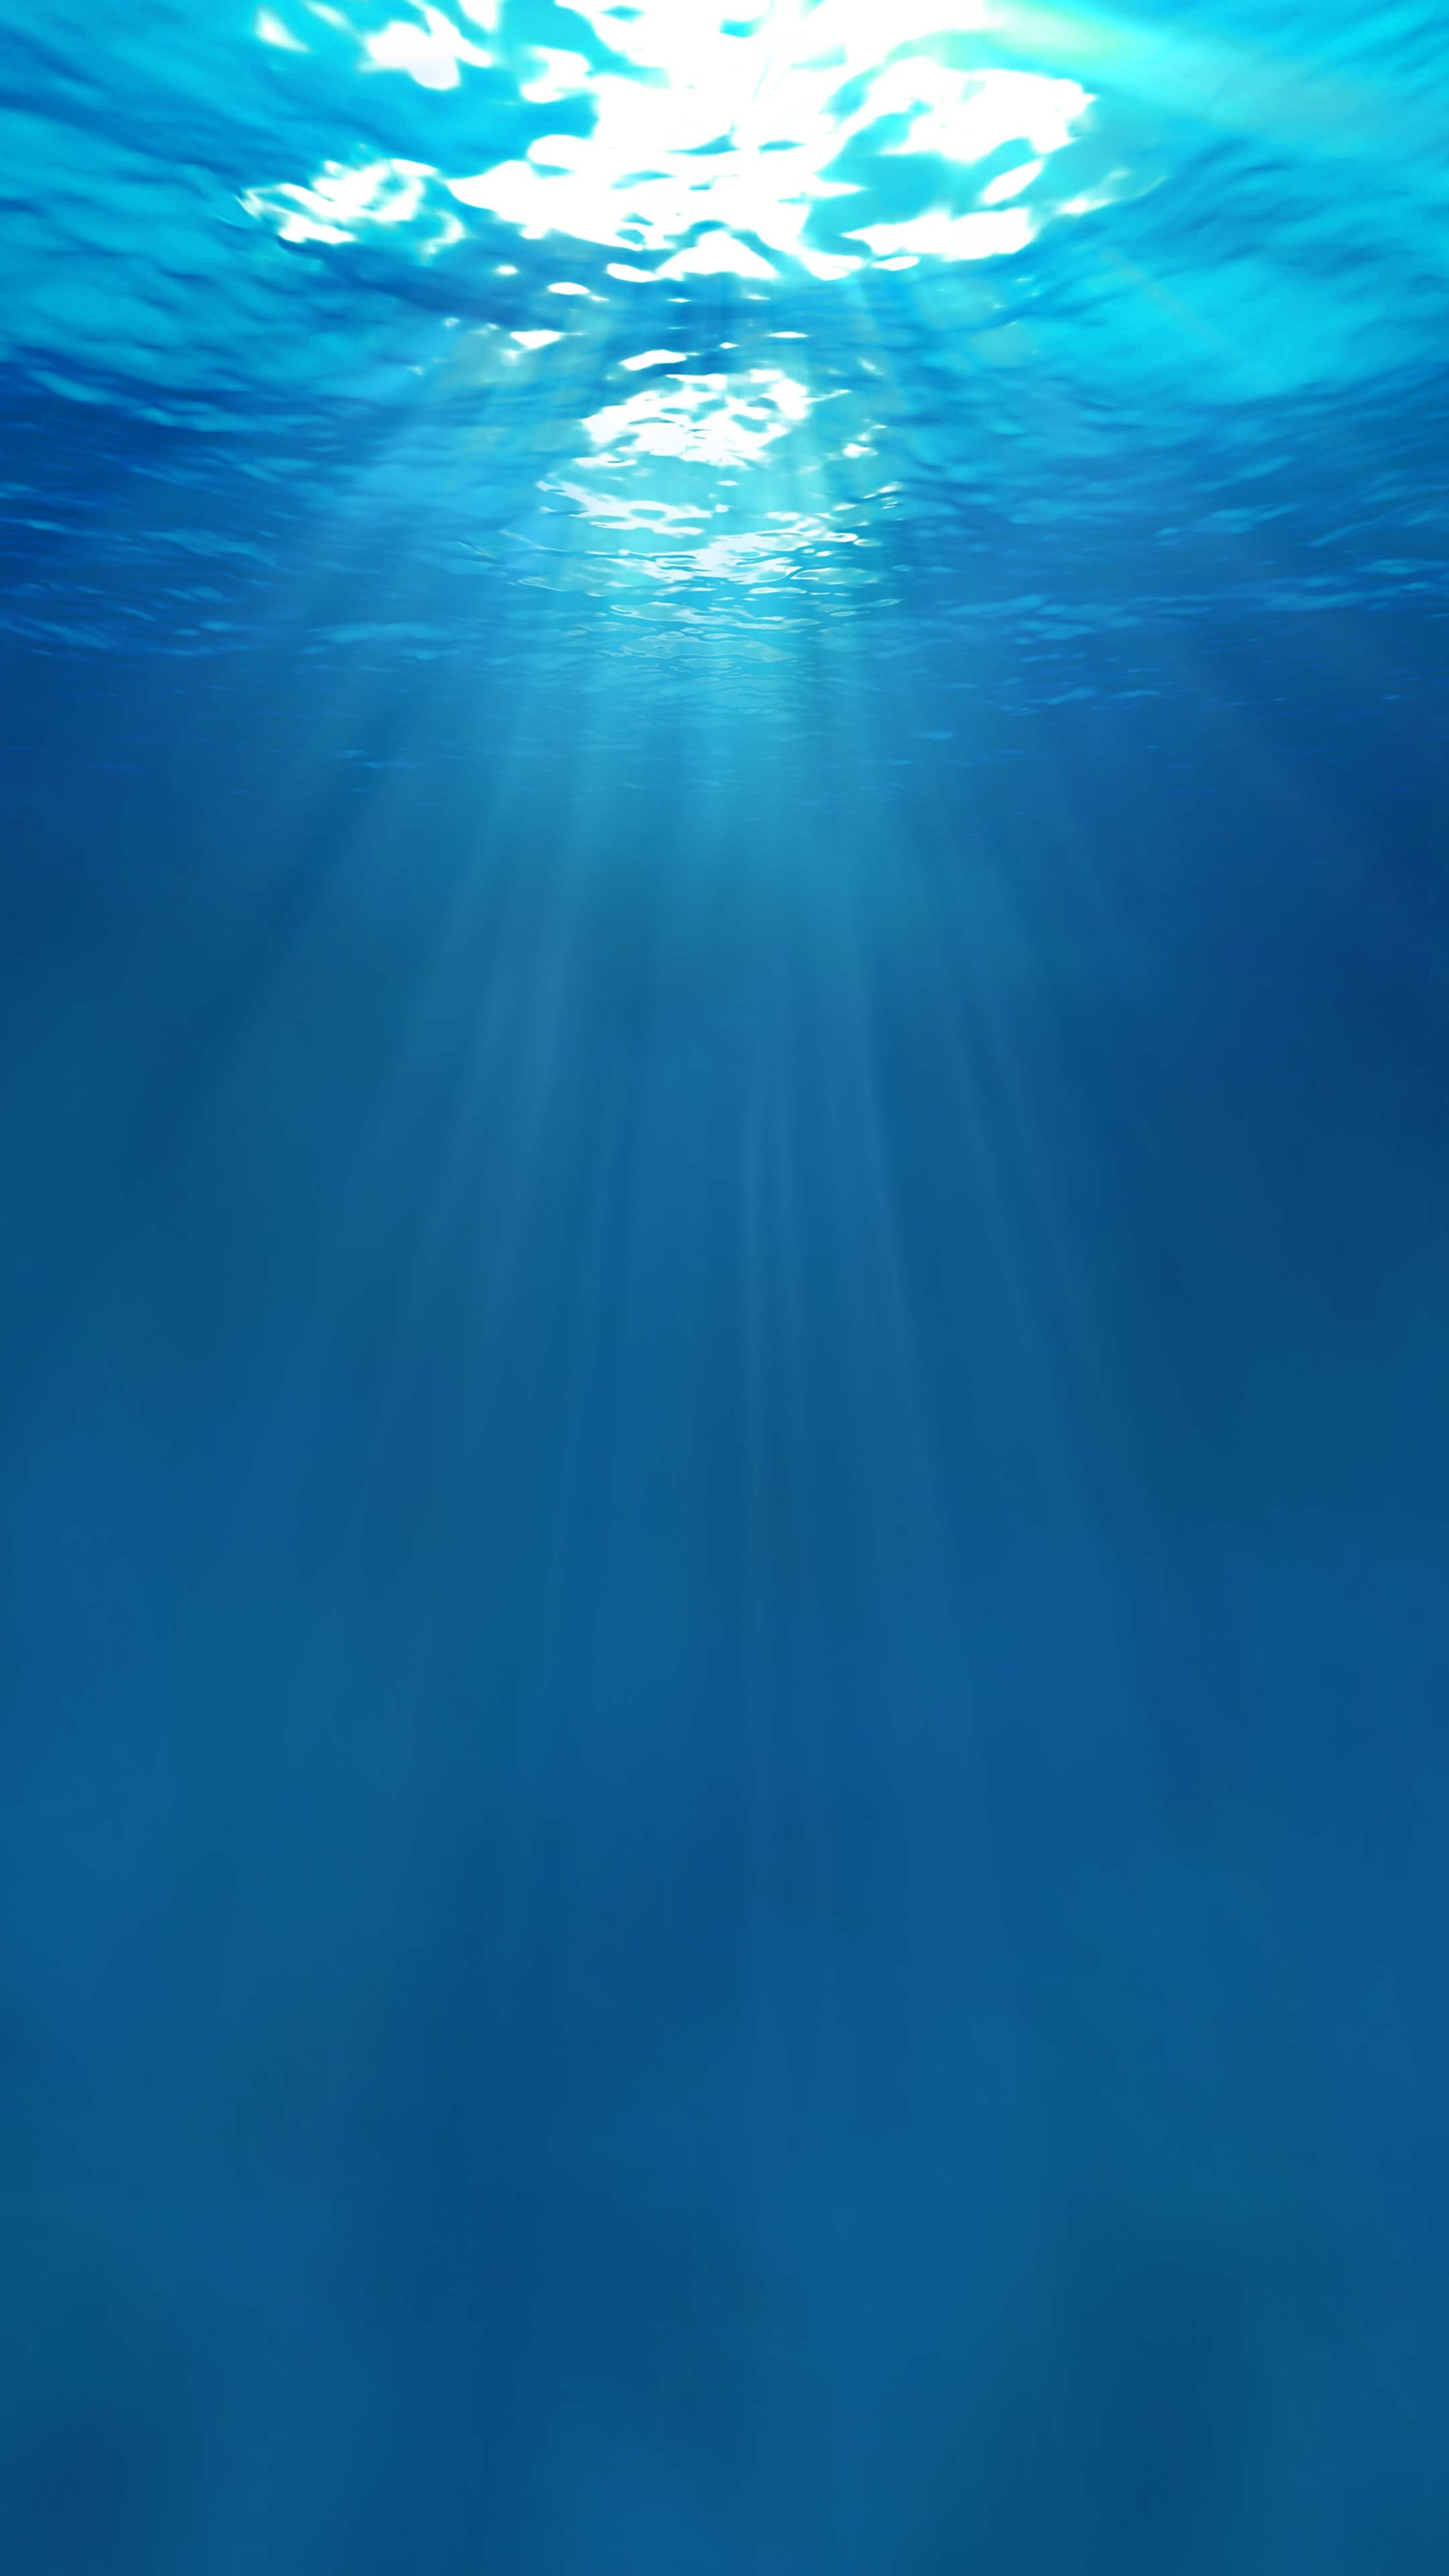 2160x3840 Light is inserted in the water | iPhone Wallpapers | Water aesthetic, Water, Ocean wallpaper